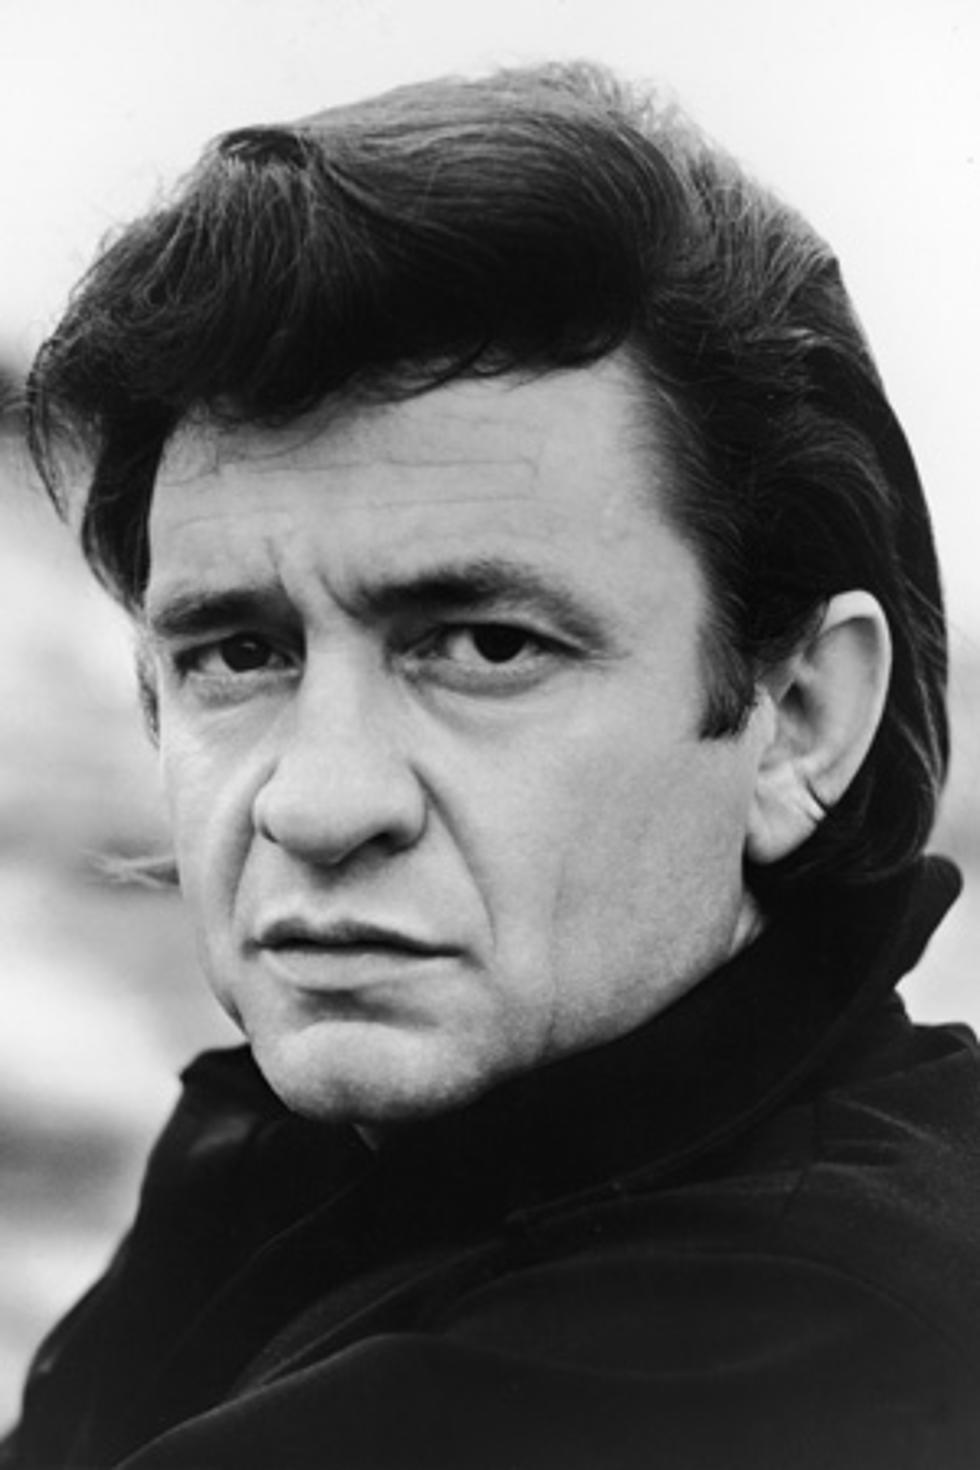 Johnny Cash Museum to Open in Nashville This Summer